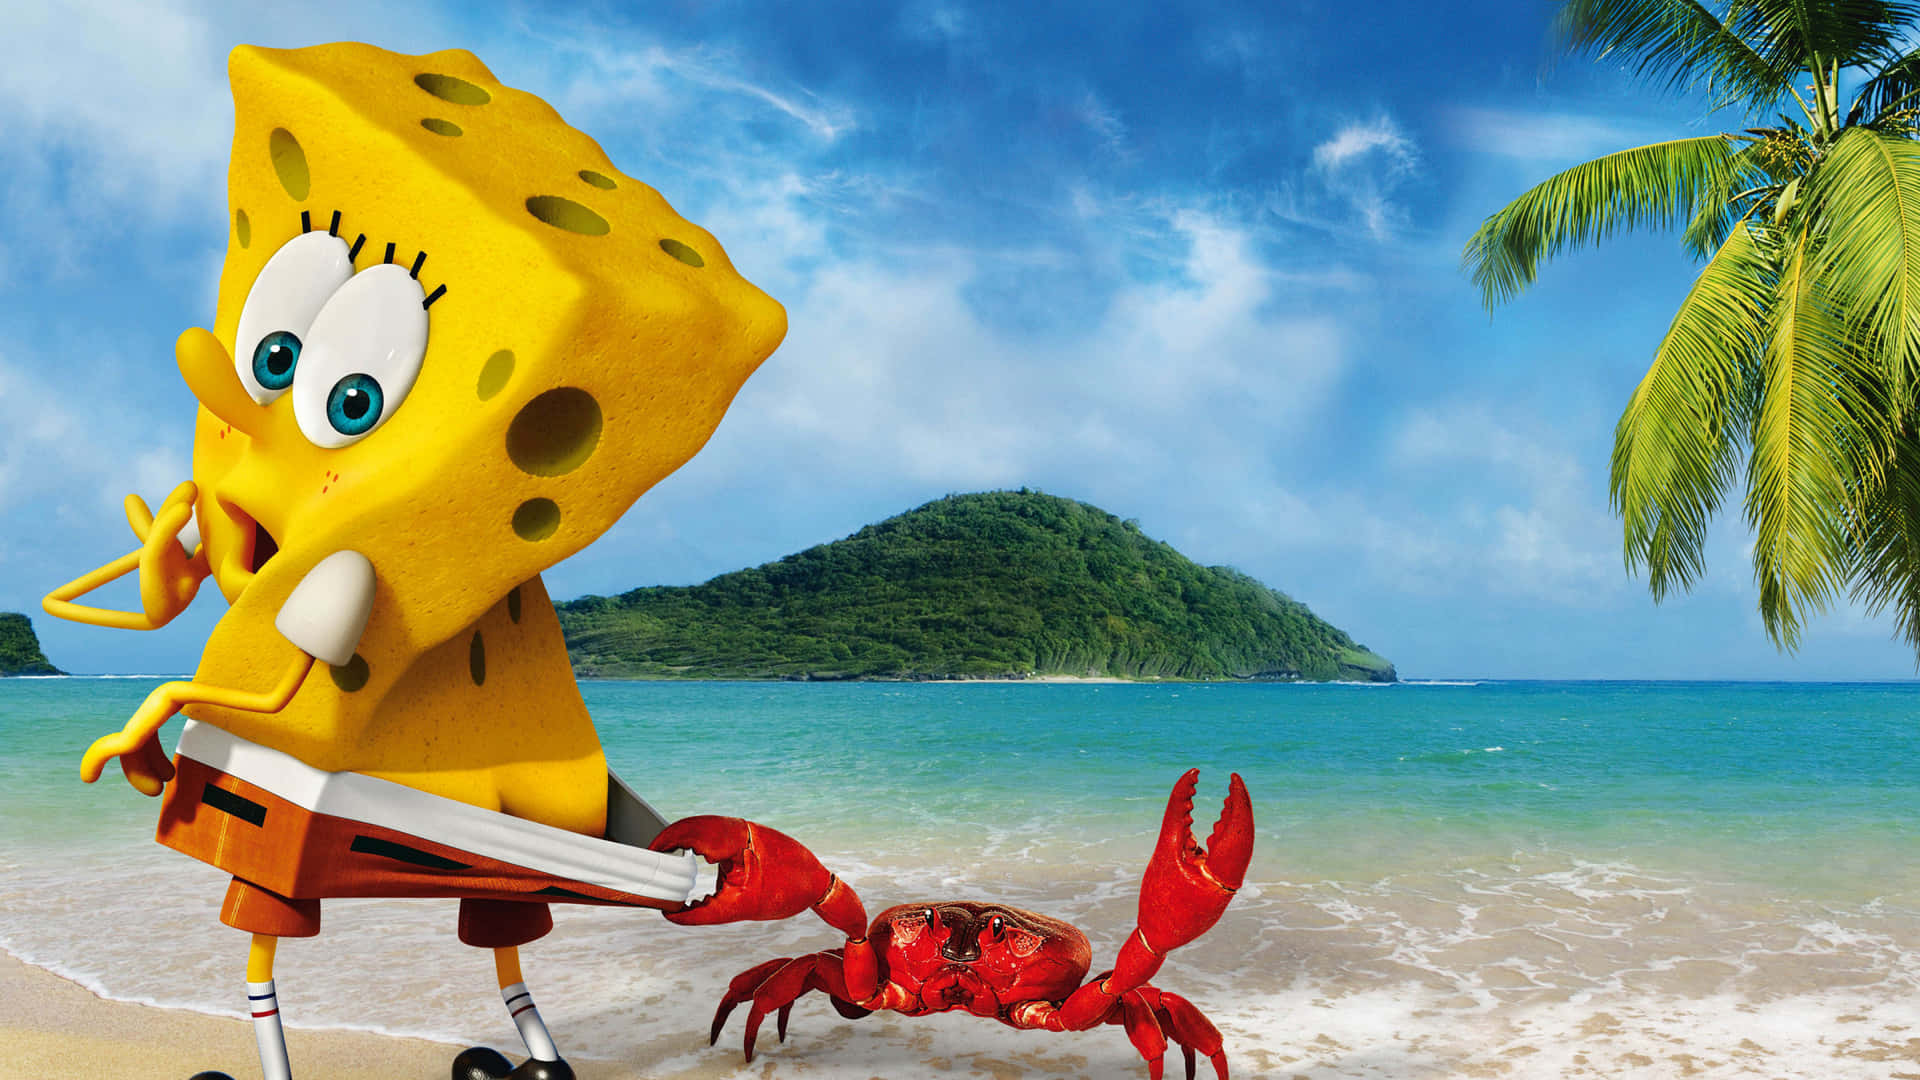 Spongebob Pinch By Crab Funny Beach Picture